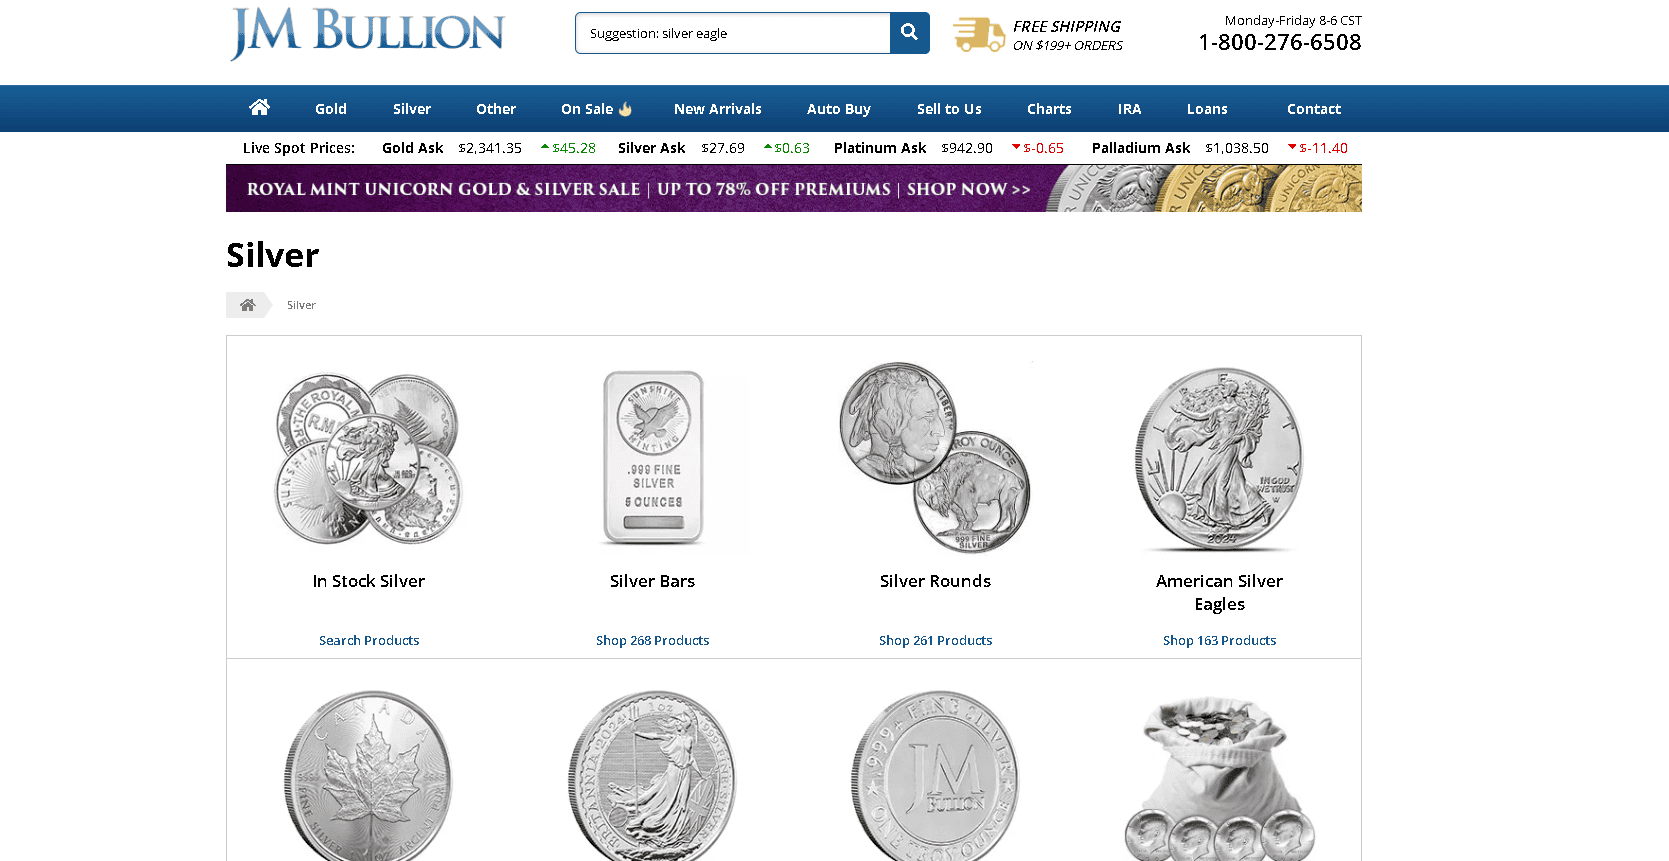 JM Bullion don't sell fake silver coins and bars. They sell real silver bullion